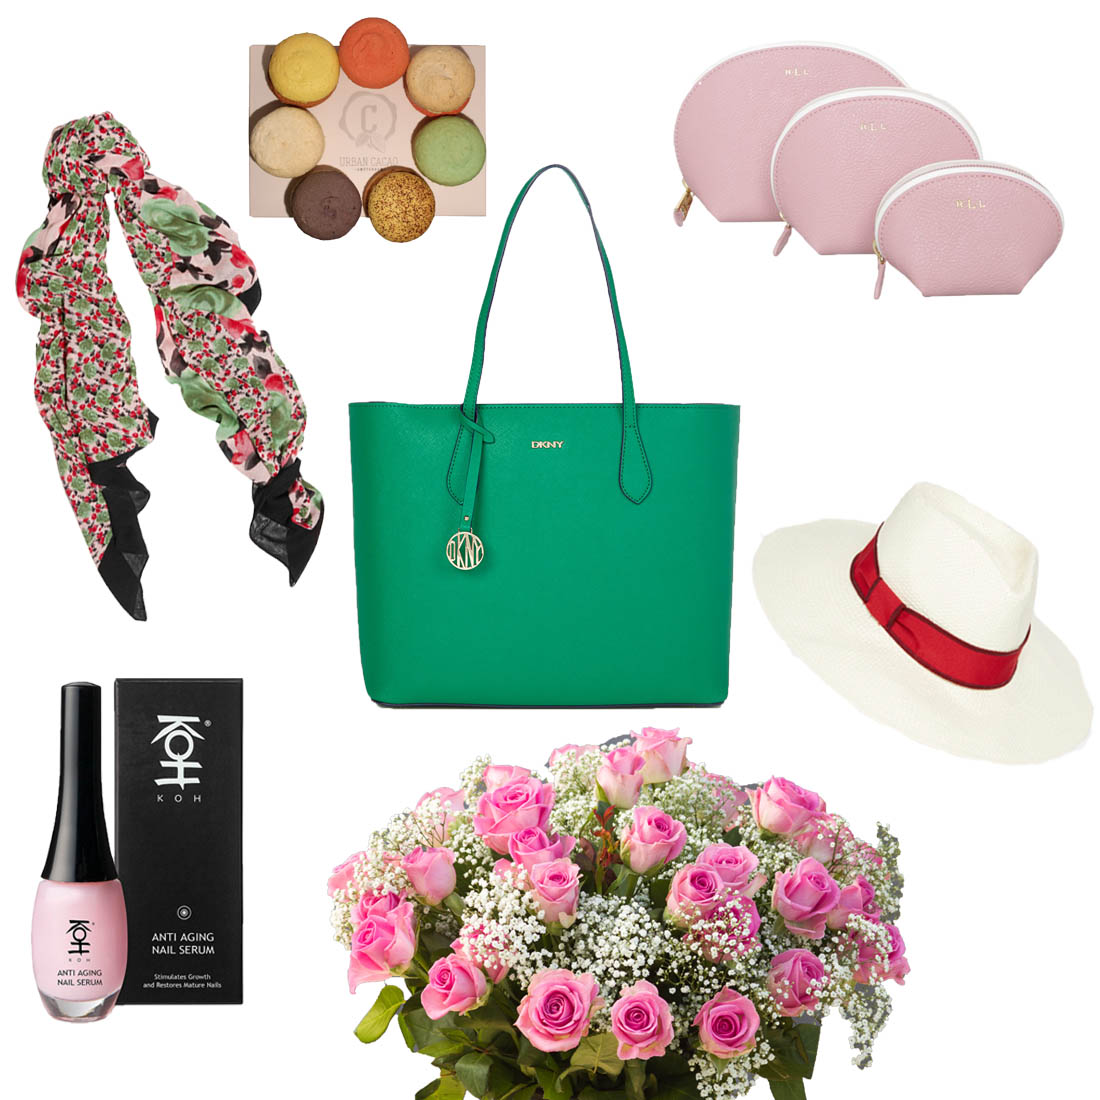 Mothers day gift ideas Bag at You